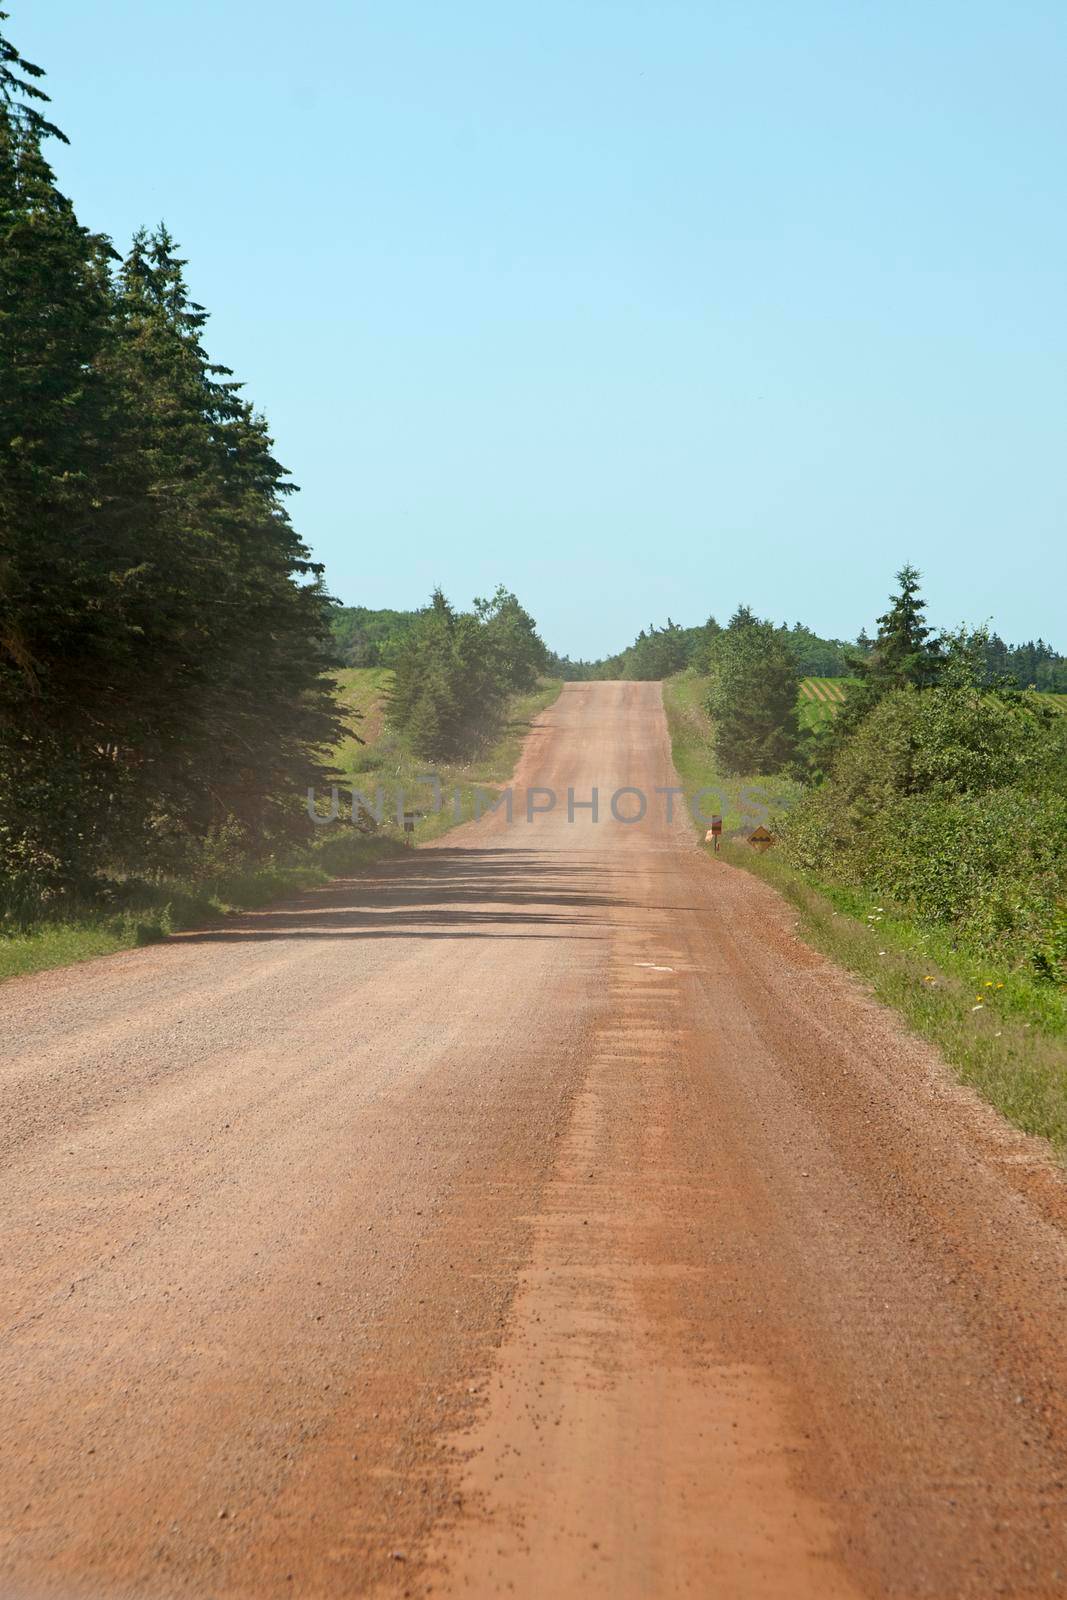 A rural red dirt road with green trees in the summer is empty of travelers